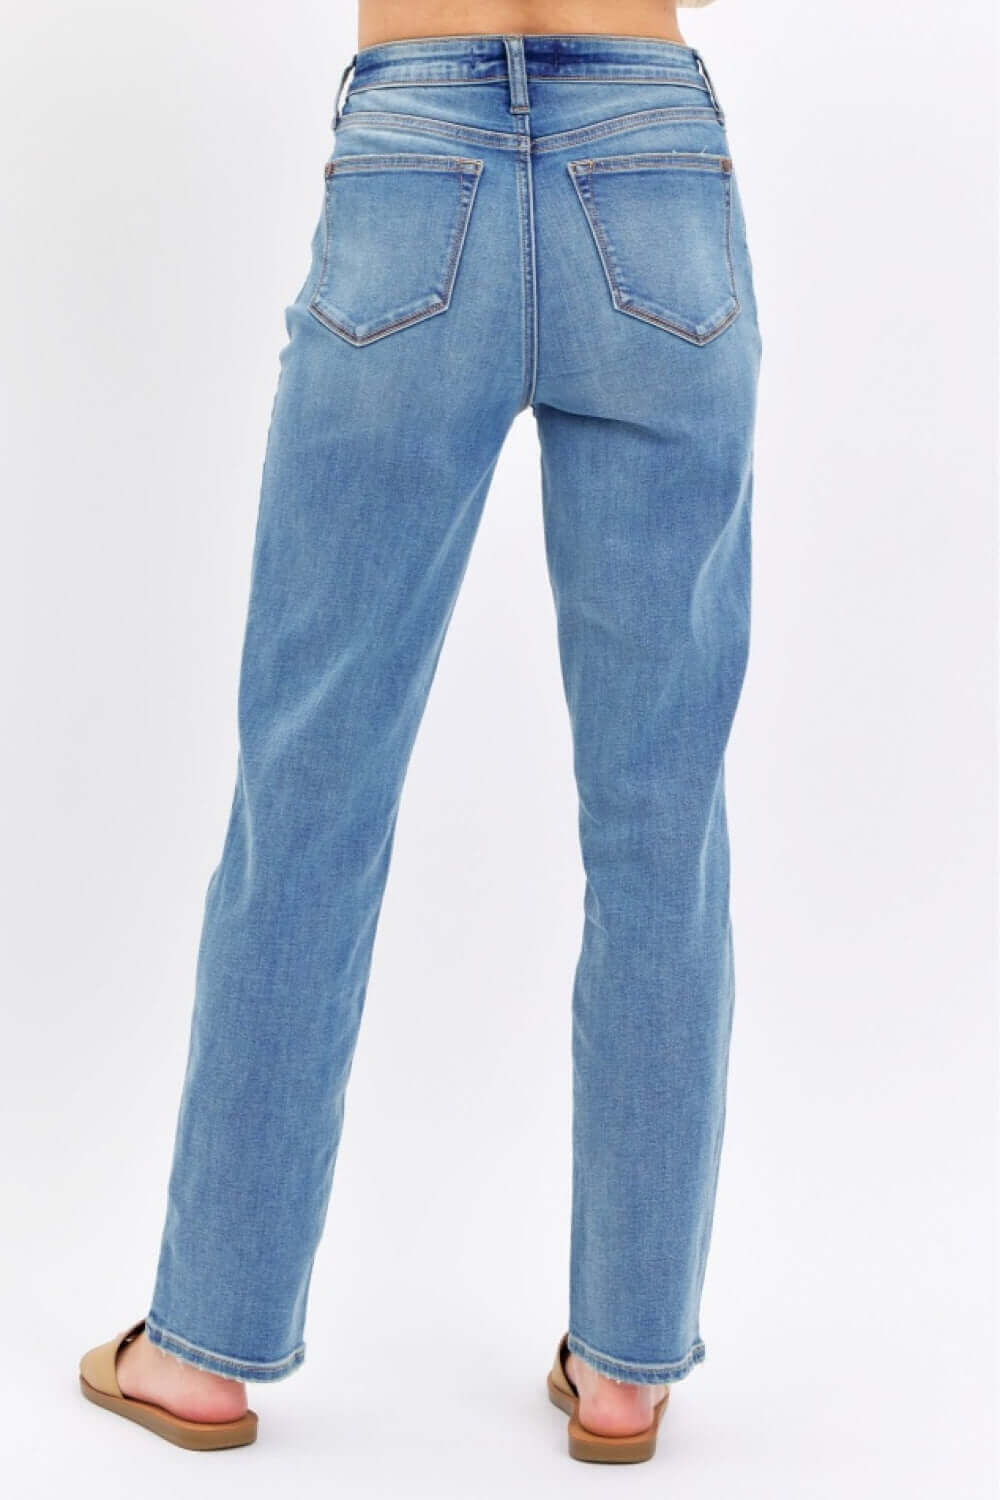 JUDY BLUE Full Size High Waist Straight Jeans at Bella Road